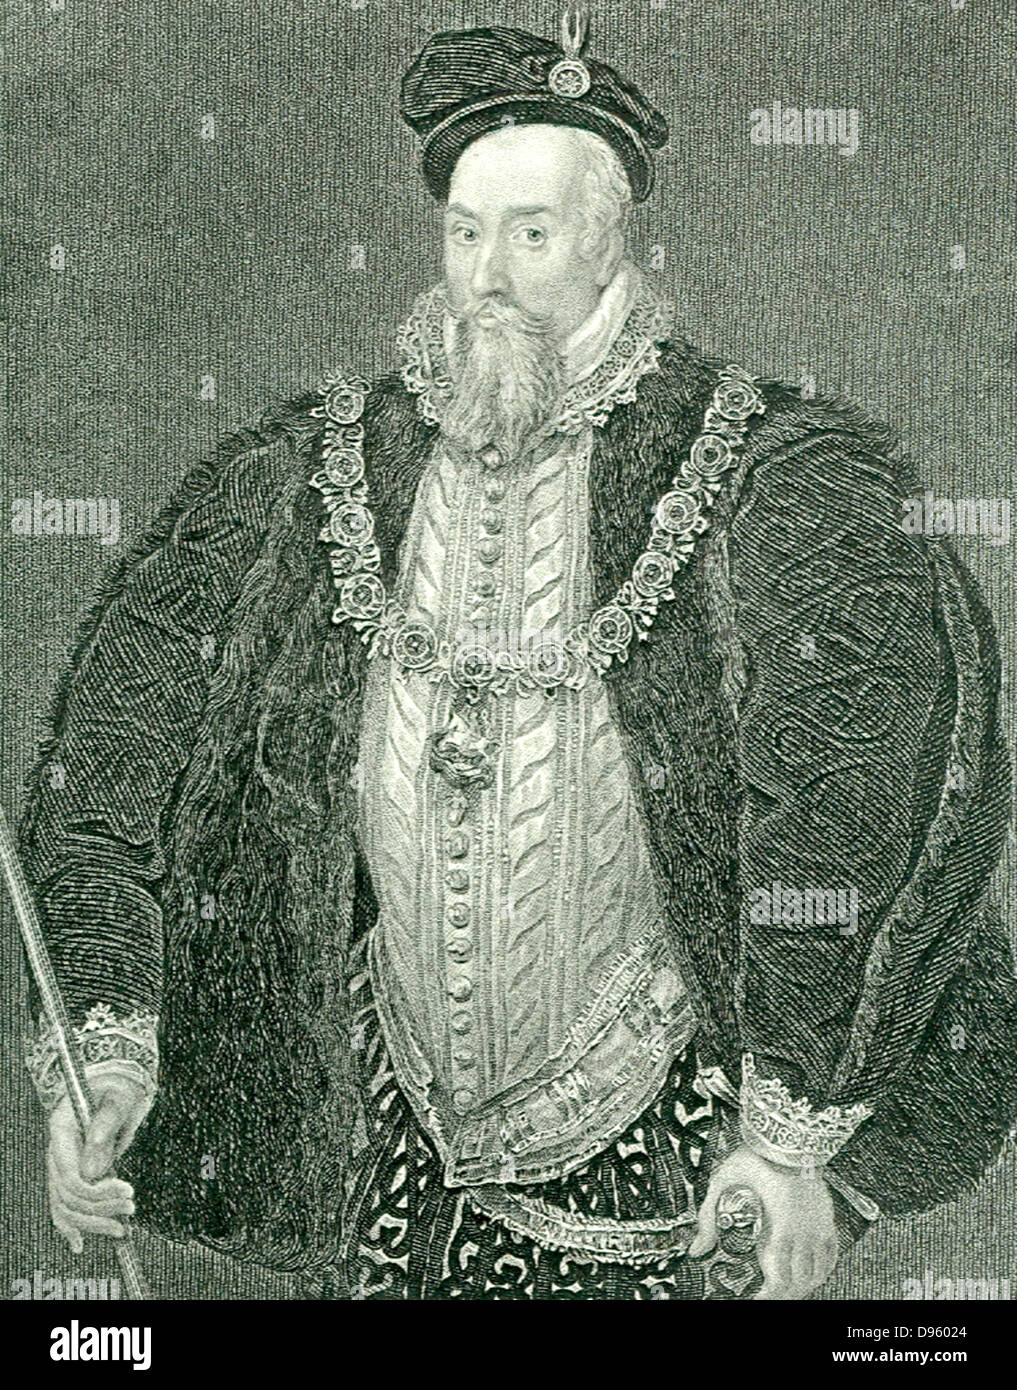 Robert Dudley, Earl of Leicester (1532-1588) English courtier. Favourite of Elizabeth I. Engraving. Stock Photo